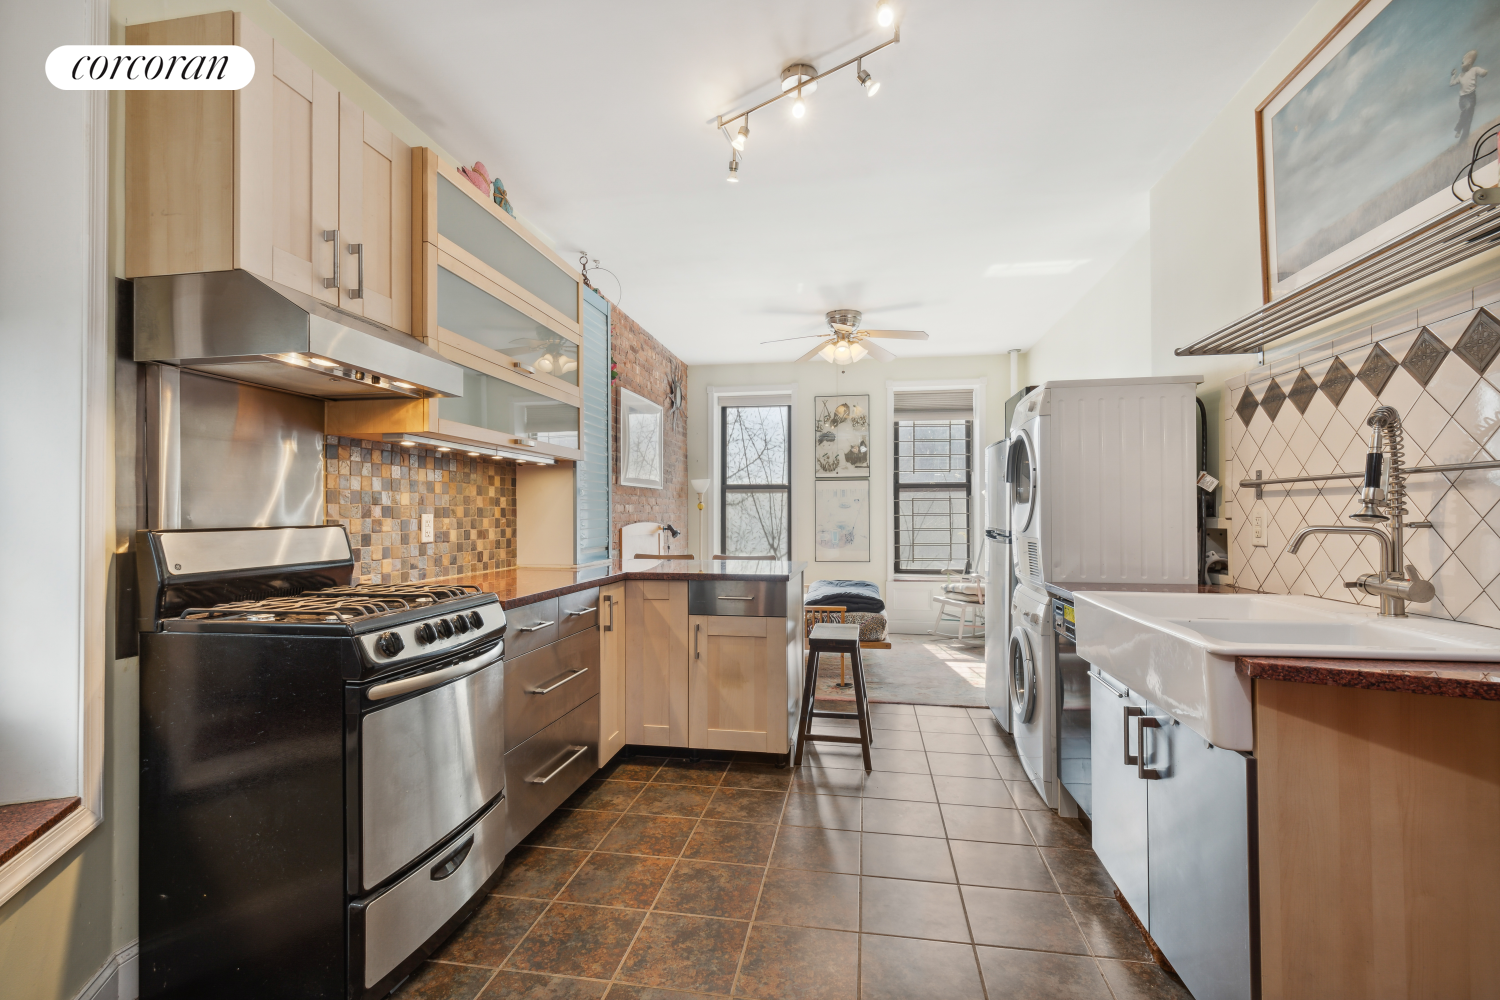 206 East 7th Street 8, East Village, Downtown, NYC - 2 Bedrooms  
2 Bathrooms  
5 Rooms - 